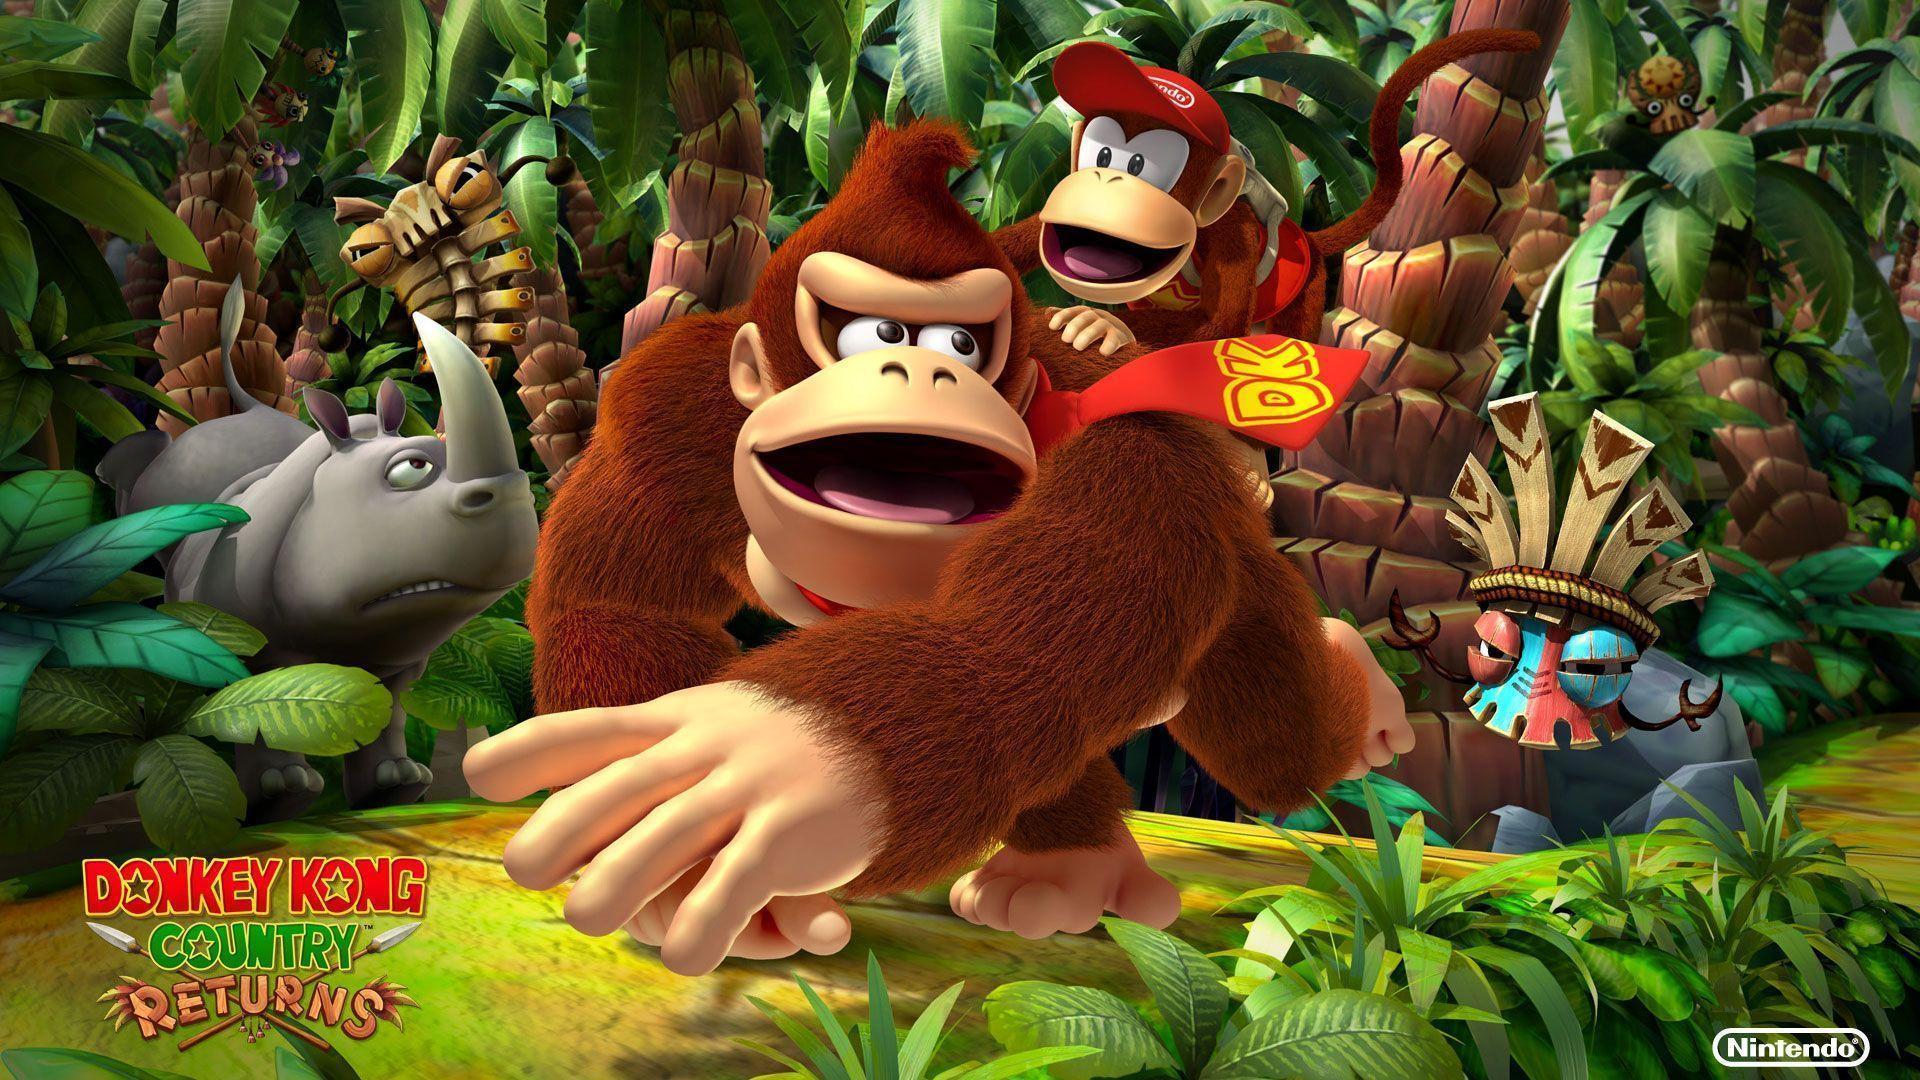 Donkey Kong Country Returns wallpapers